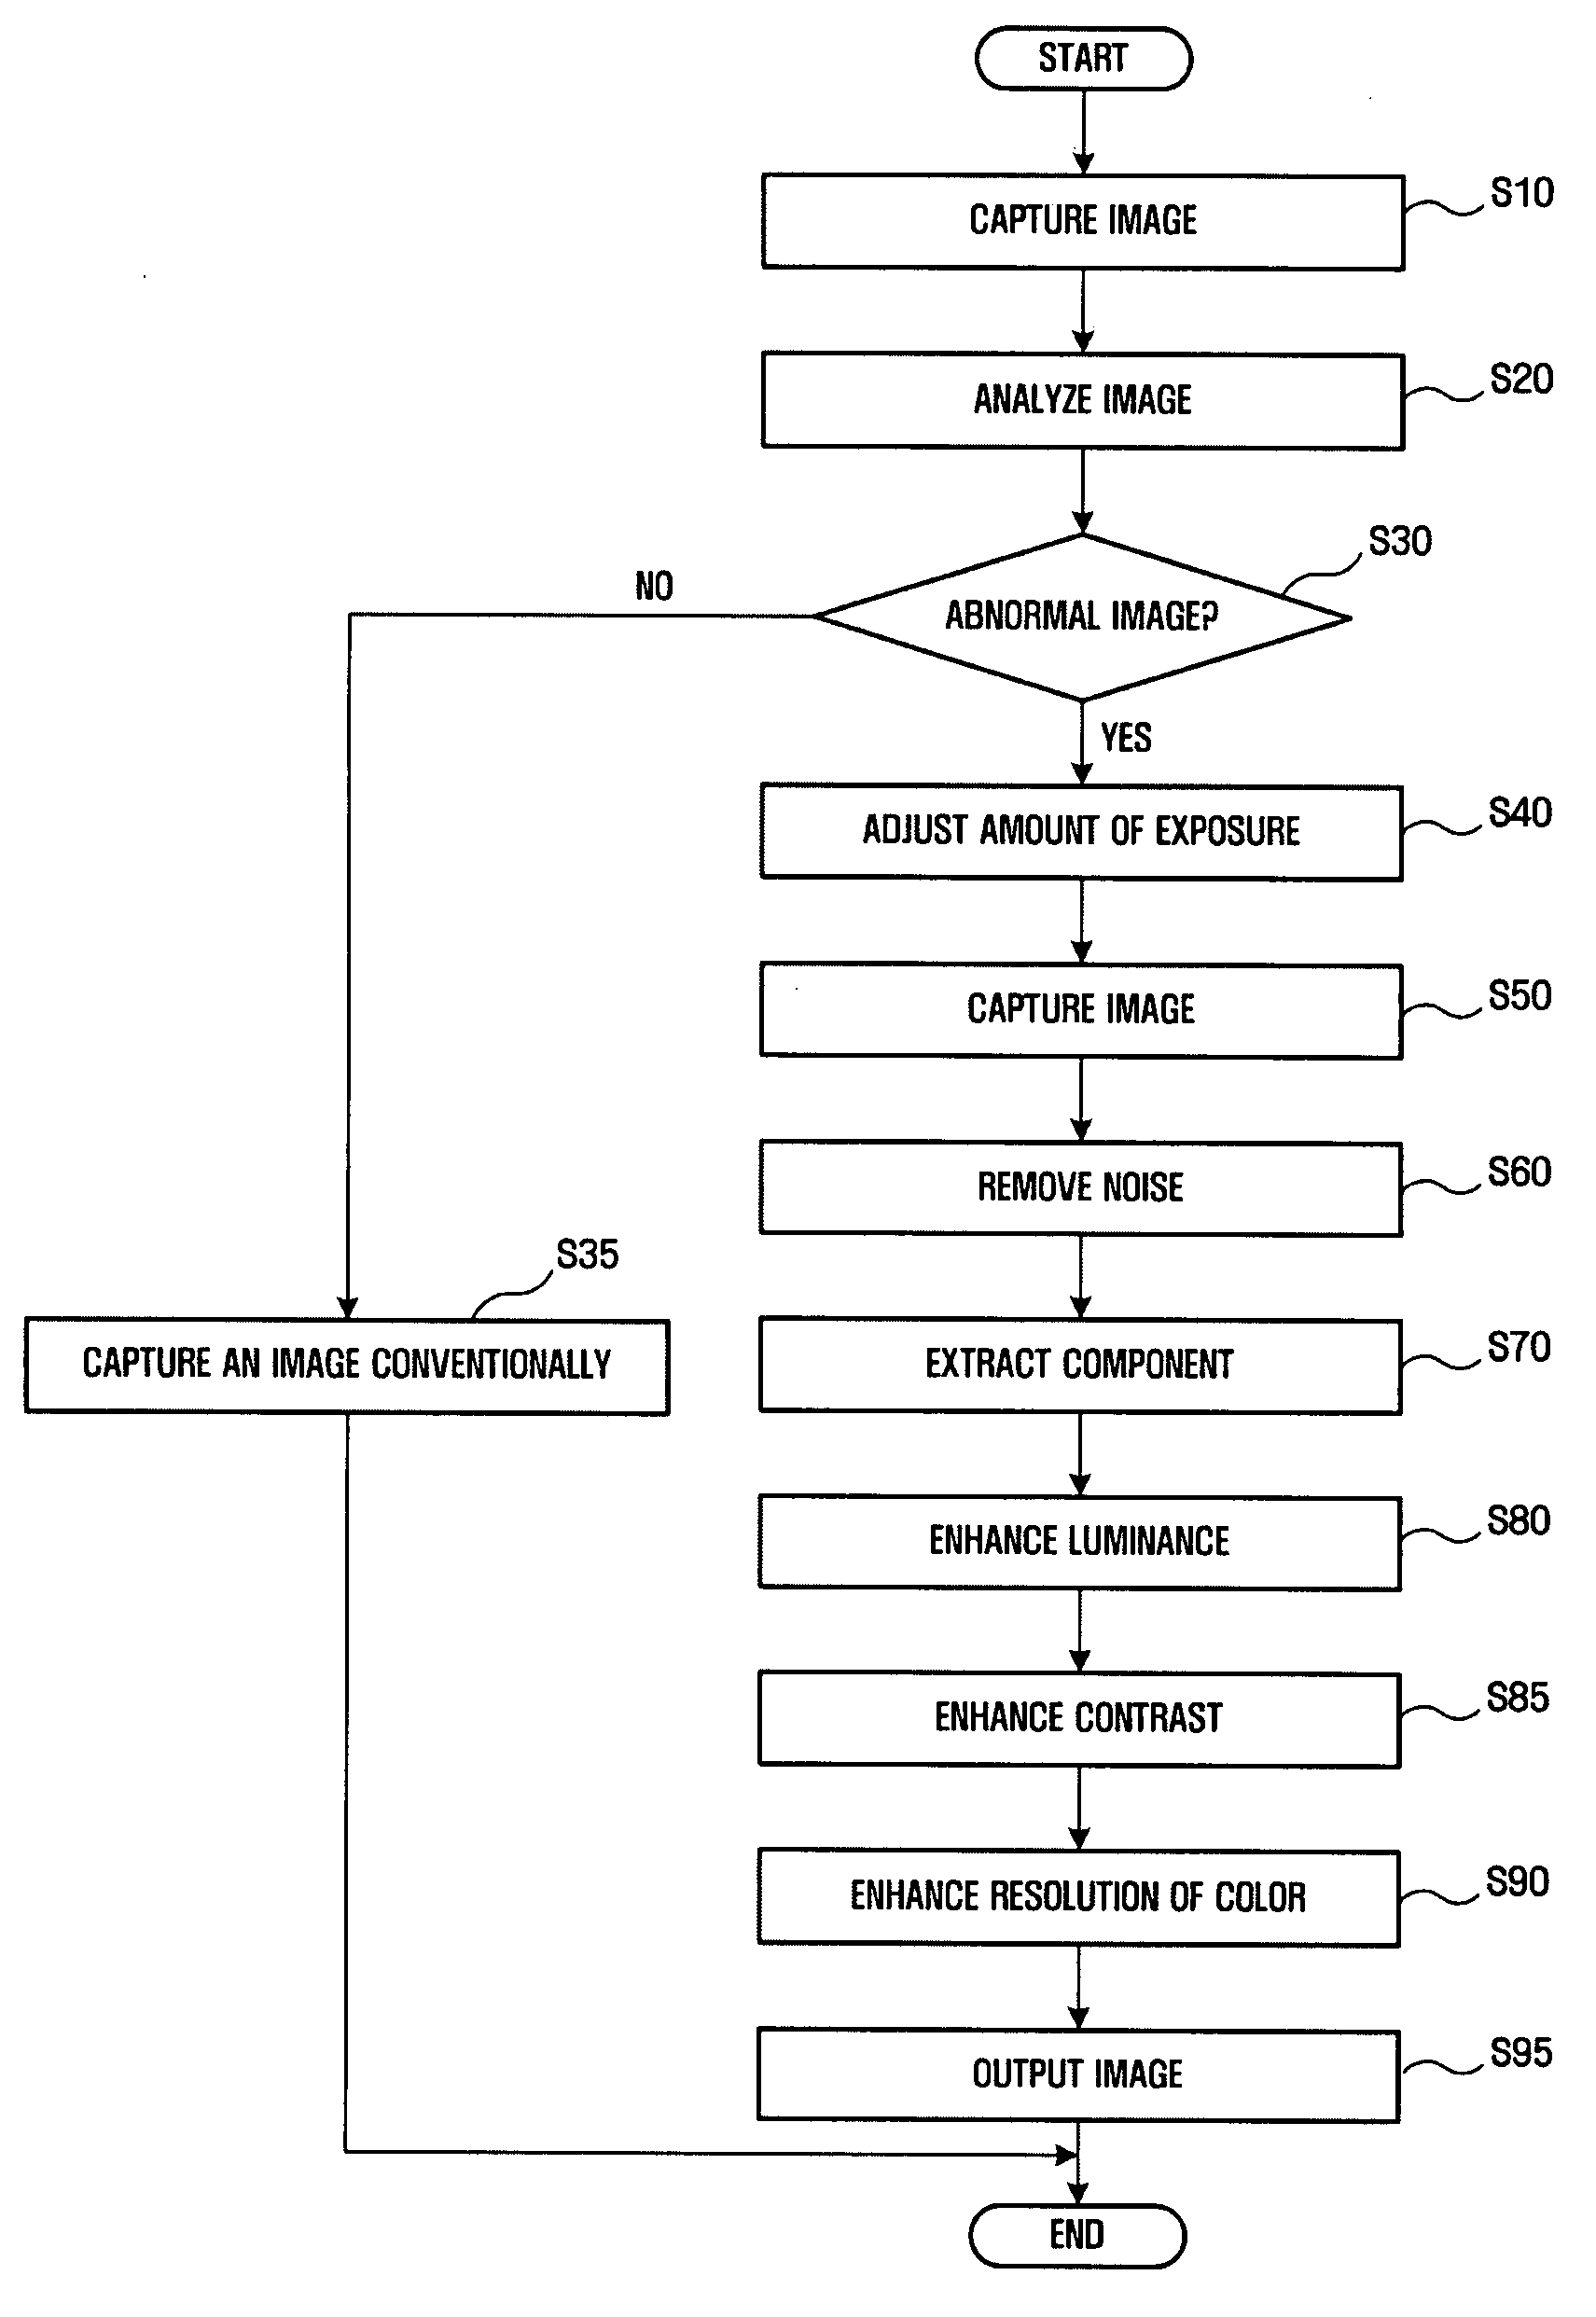 Method and apparatus for enhancing image, and image-processing system using the same